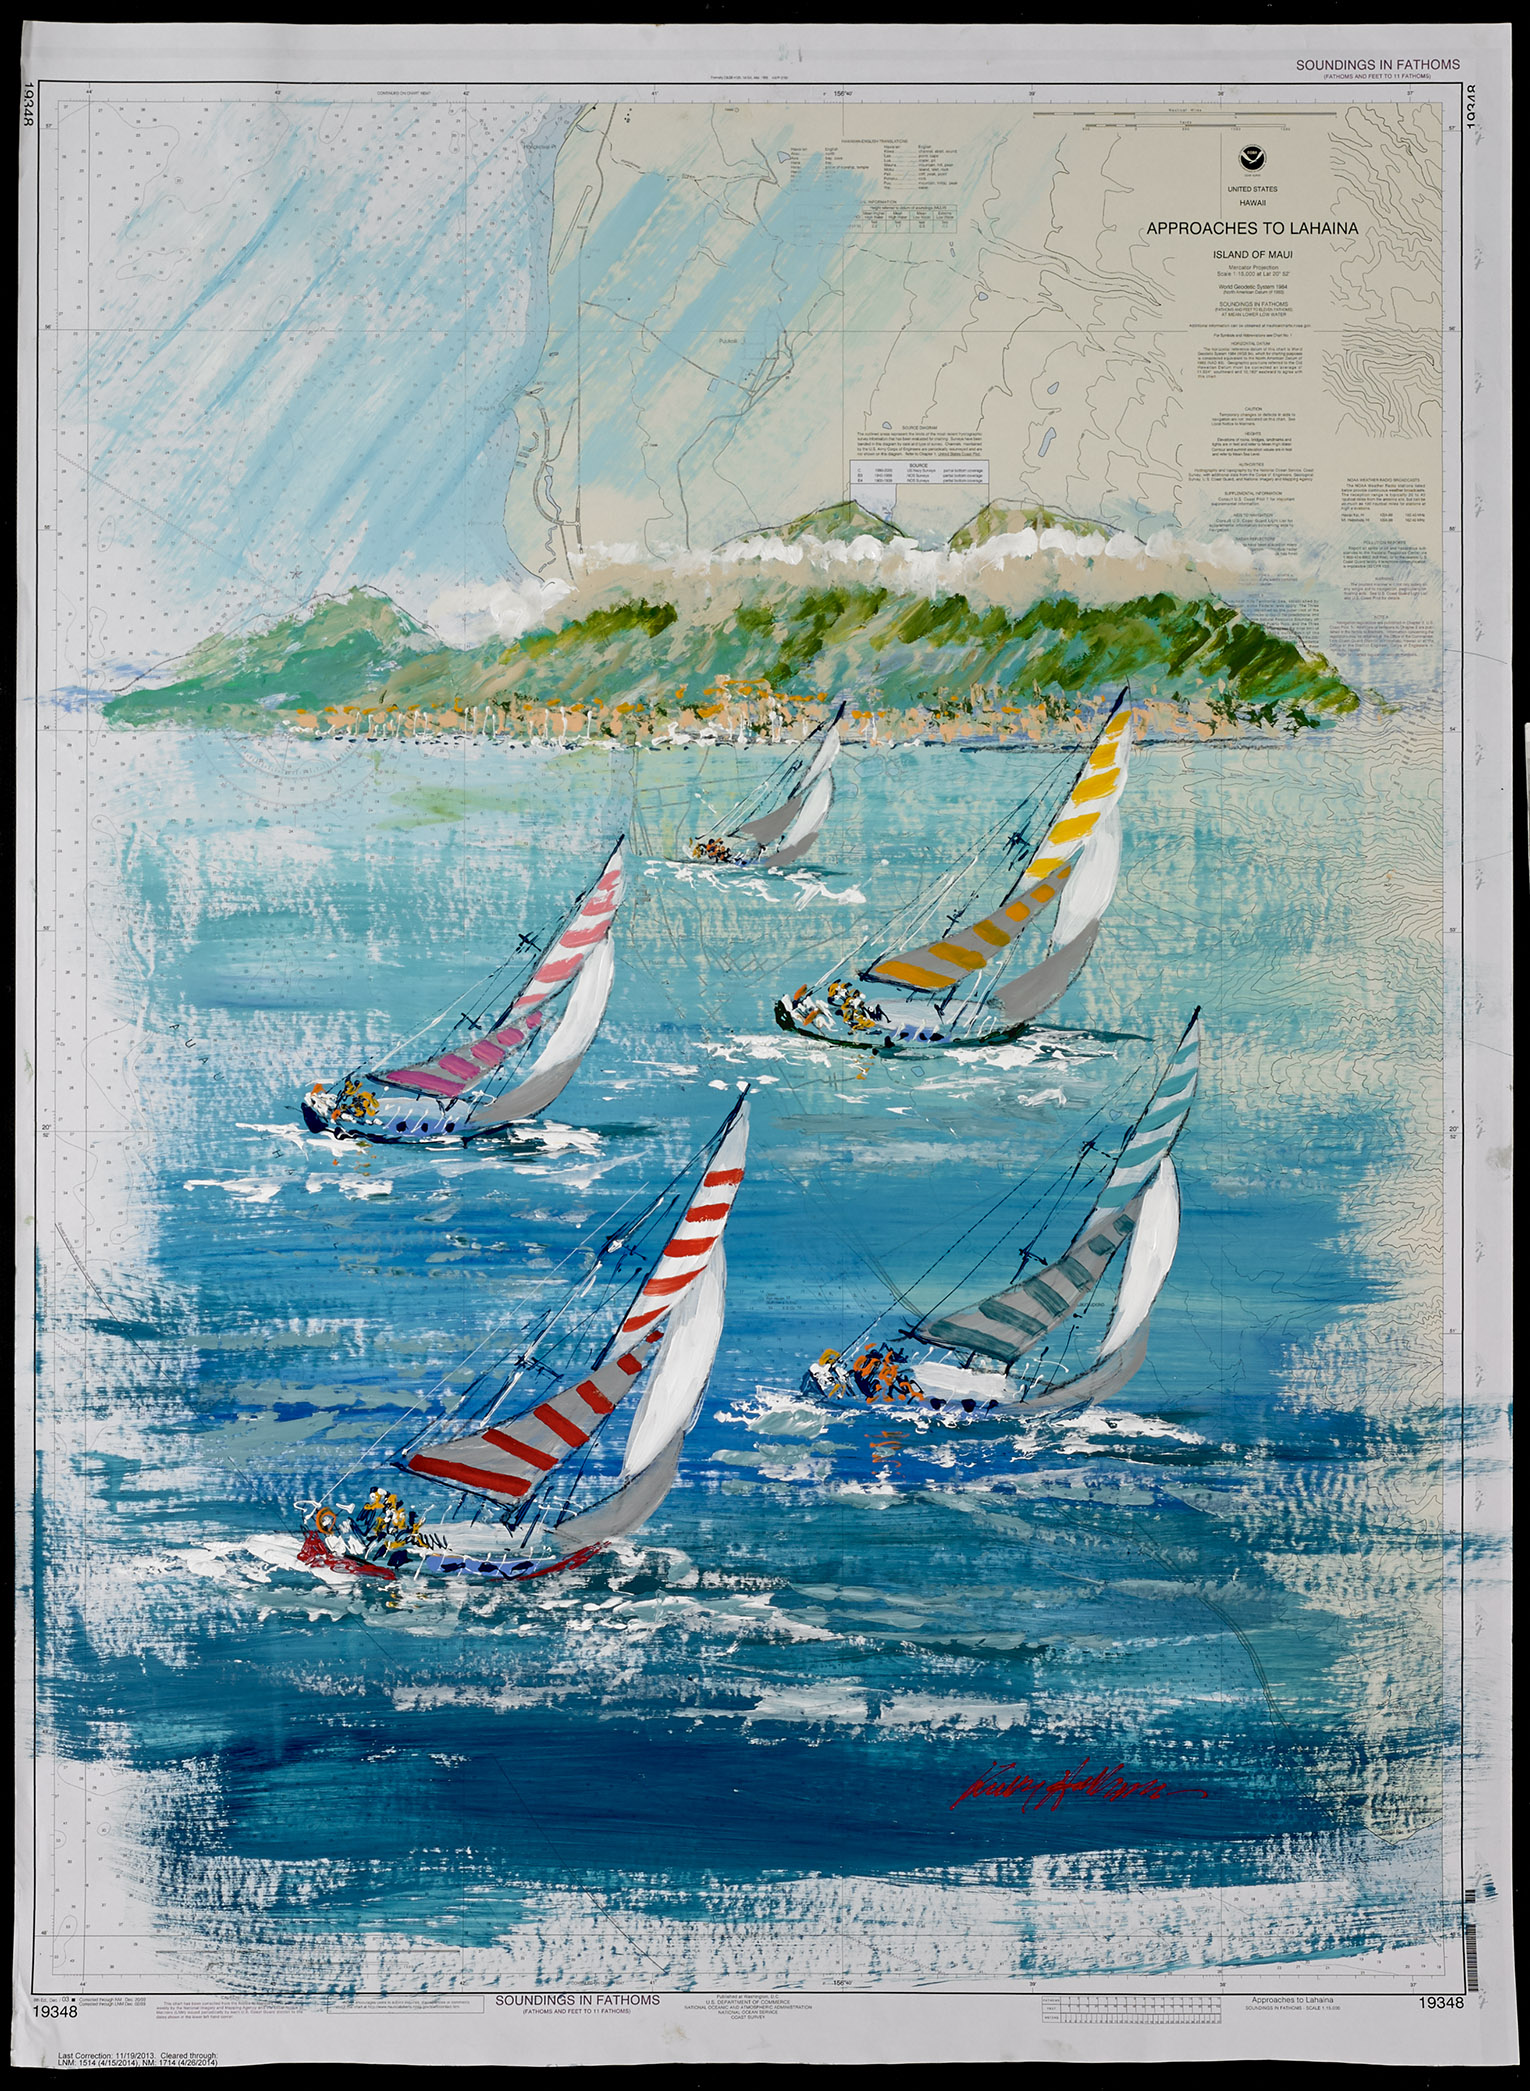 Kerry Hallam, Approaches to Lahaina, acrylic on nautical chart, 45.75 x 34.4 inches